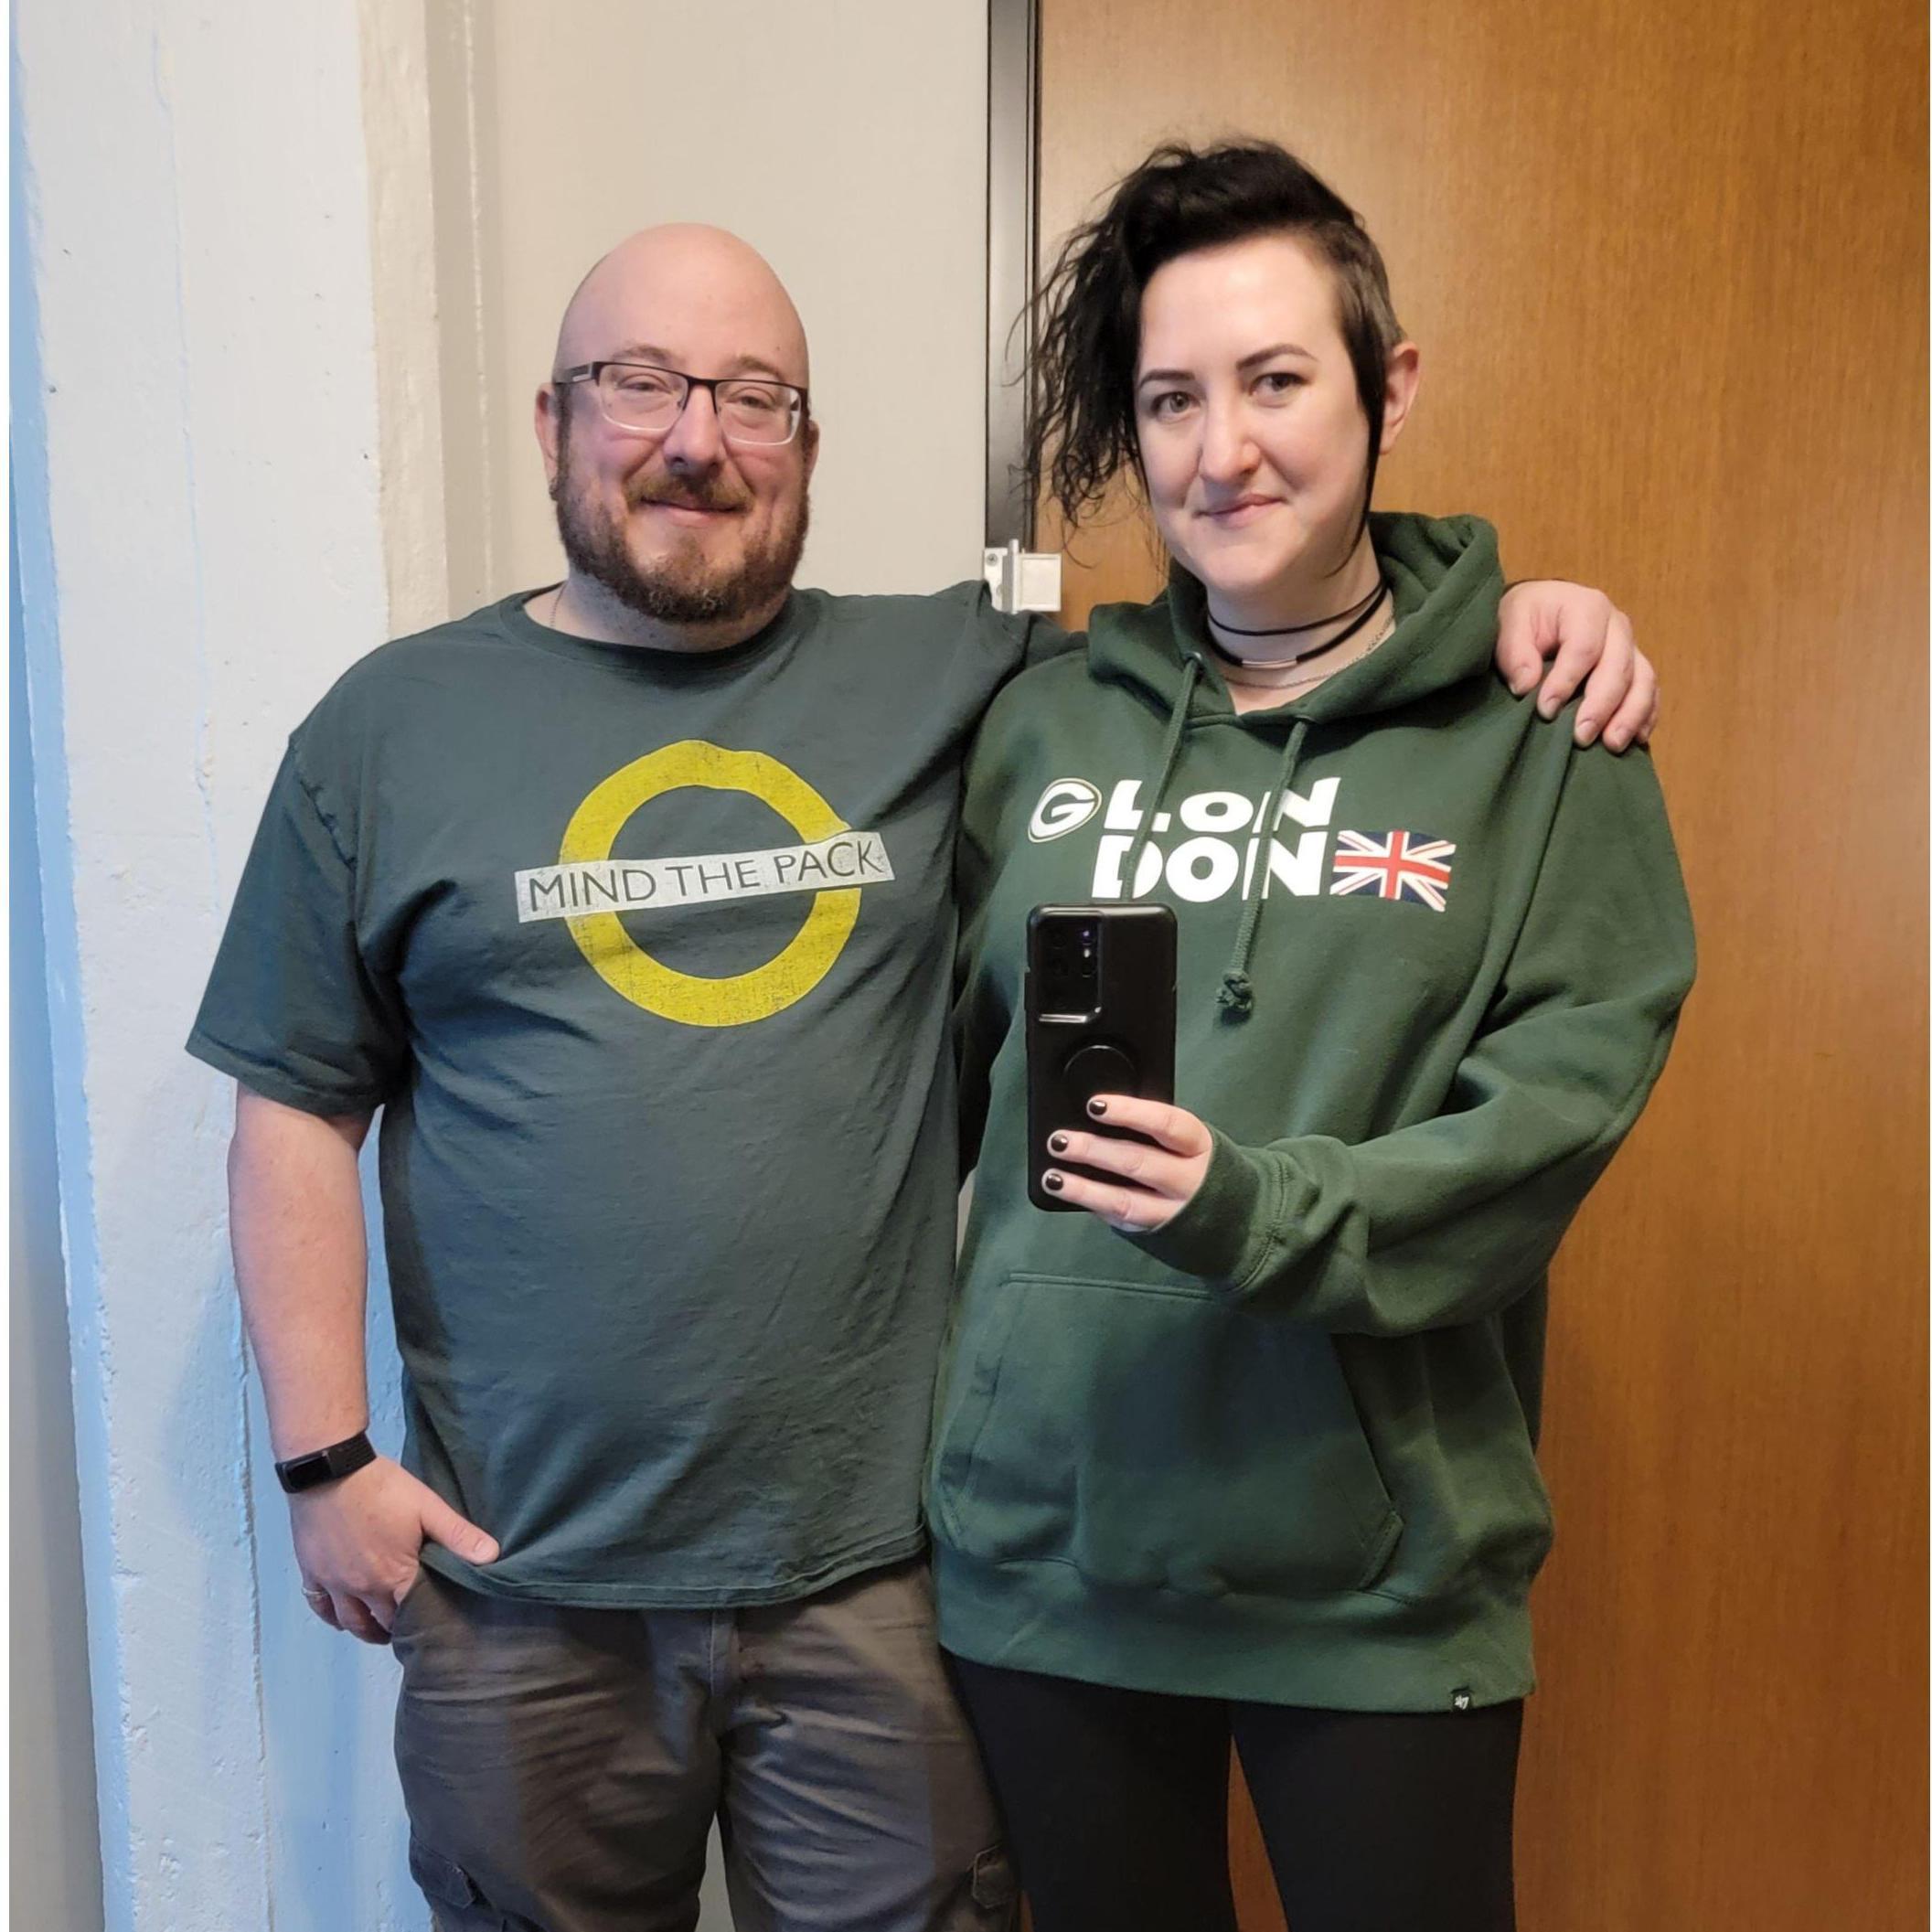 During Lauren's first visit to Wisconsin to finally meet Josh, The Packers were playing in London. Josh provided a hoodie so the Philadelphian wouldn't stick out too much!